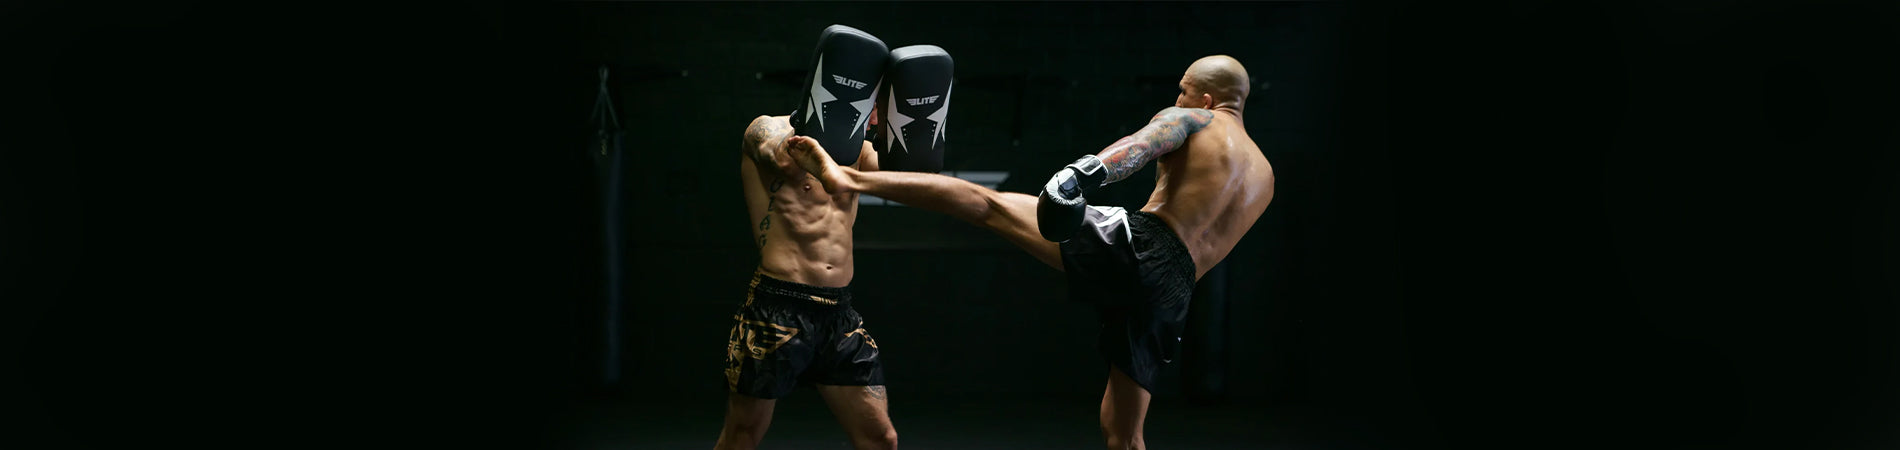 How to Learn Kickboxing on Your Own